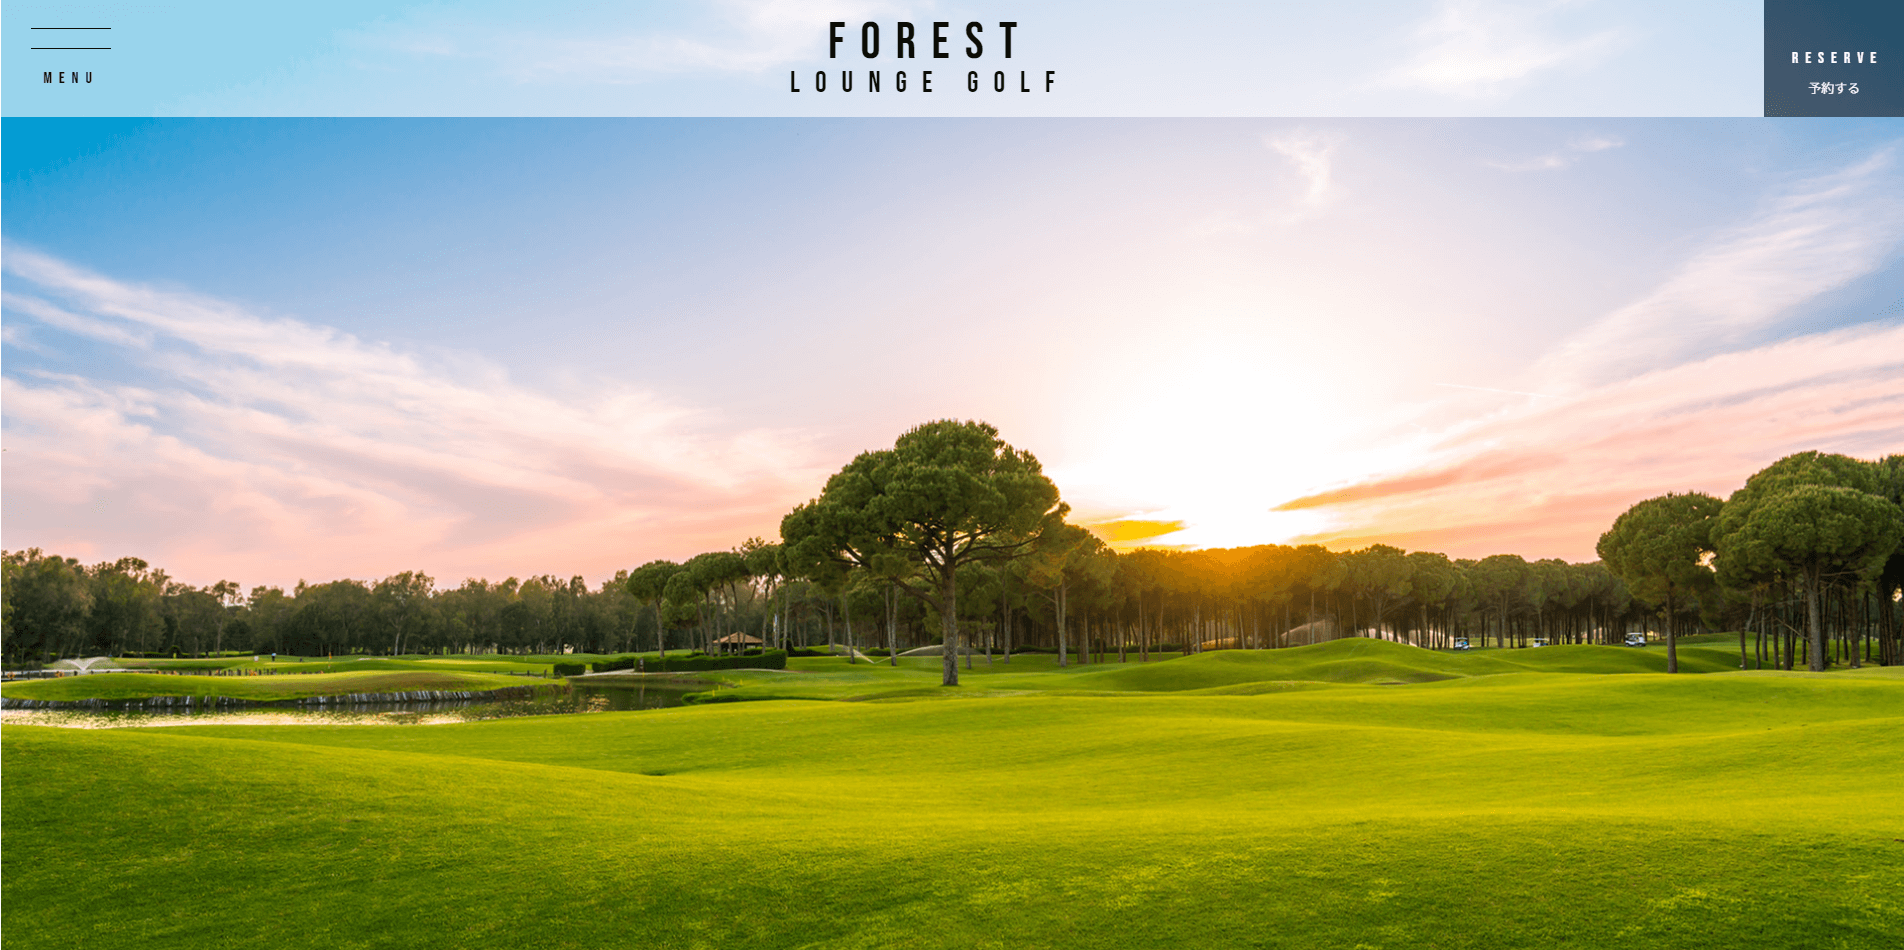 FOREST LOUNGE GOLF